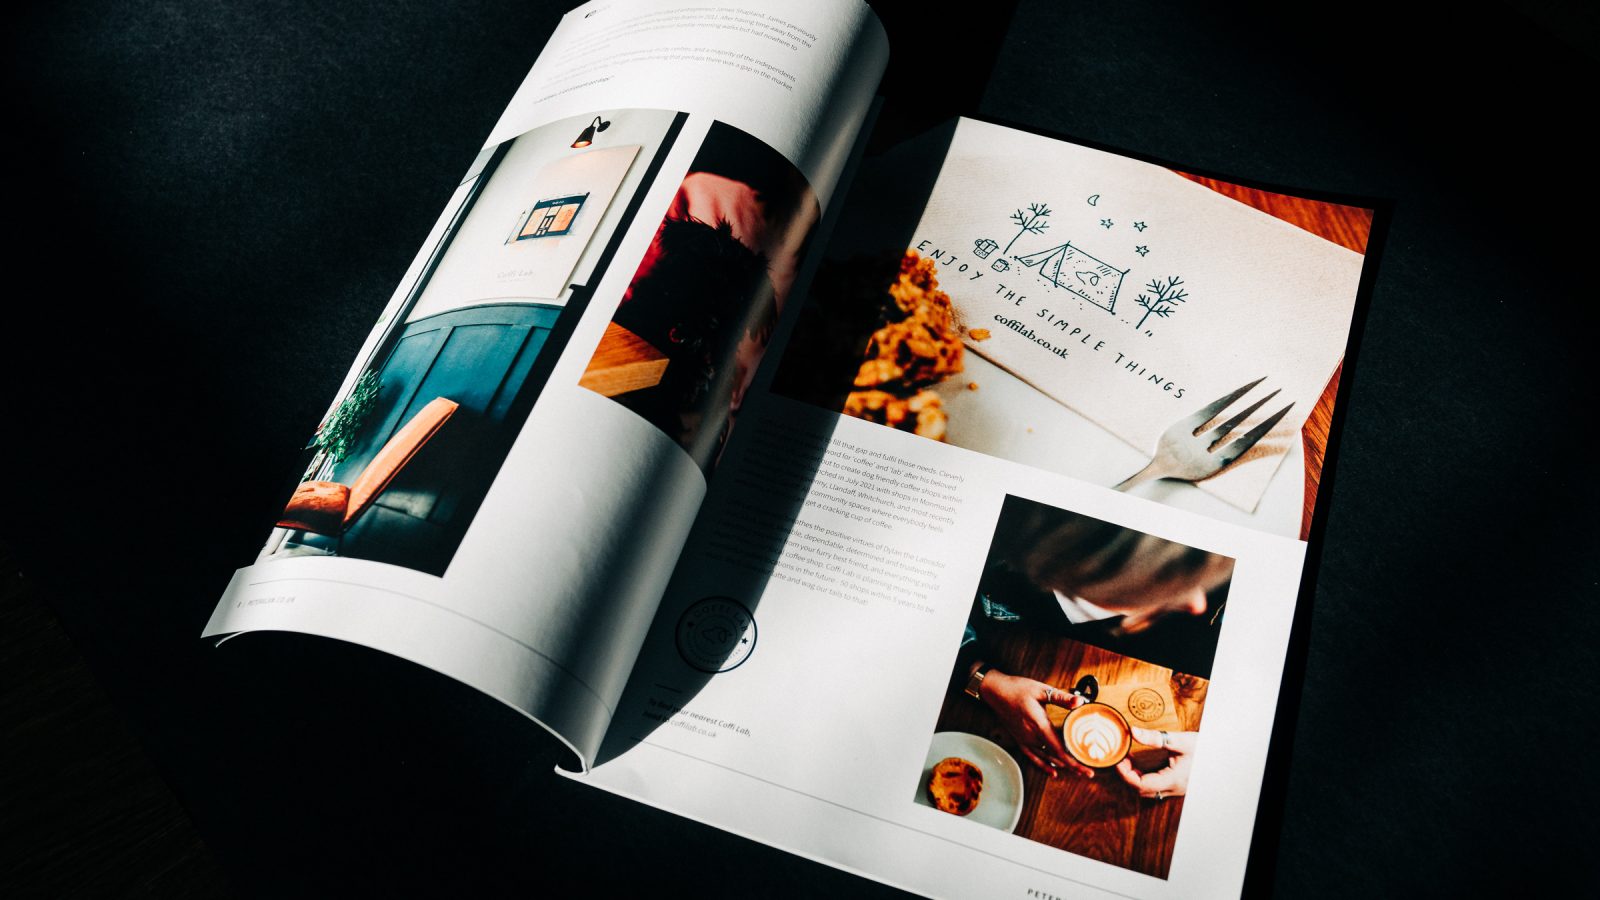 An open magazine on a dark table featuring a well-designed, full-page food article with vibrant photographs of dishes and a graphic design recipe layout. Light illuminates the pages from the top.